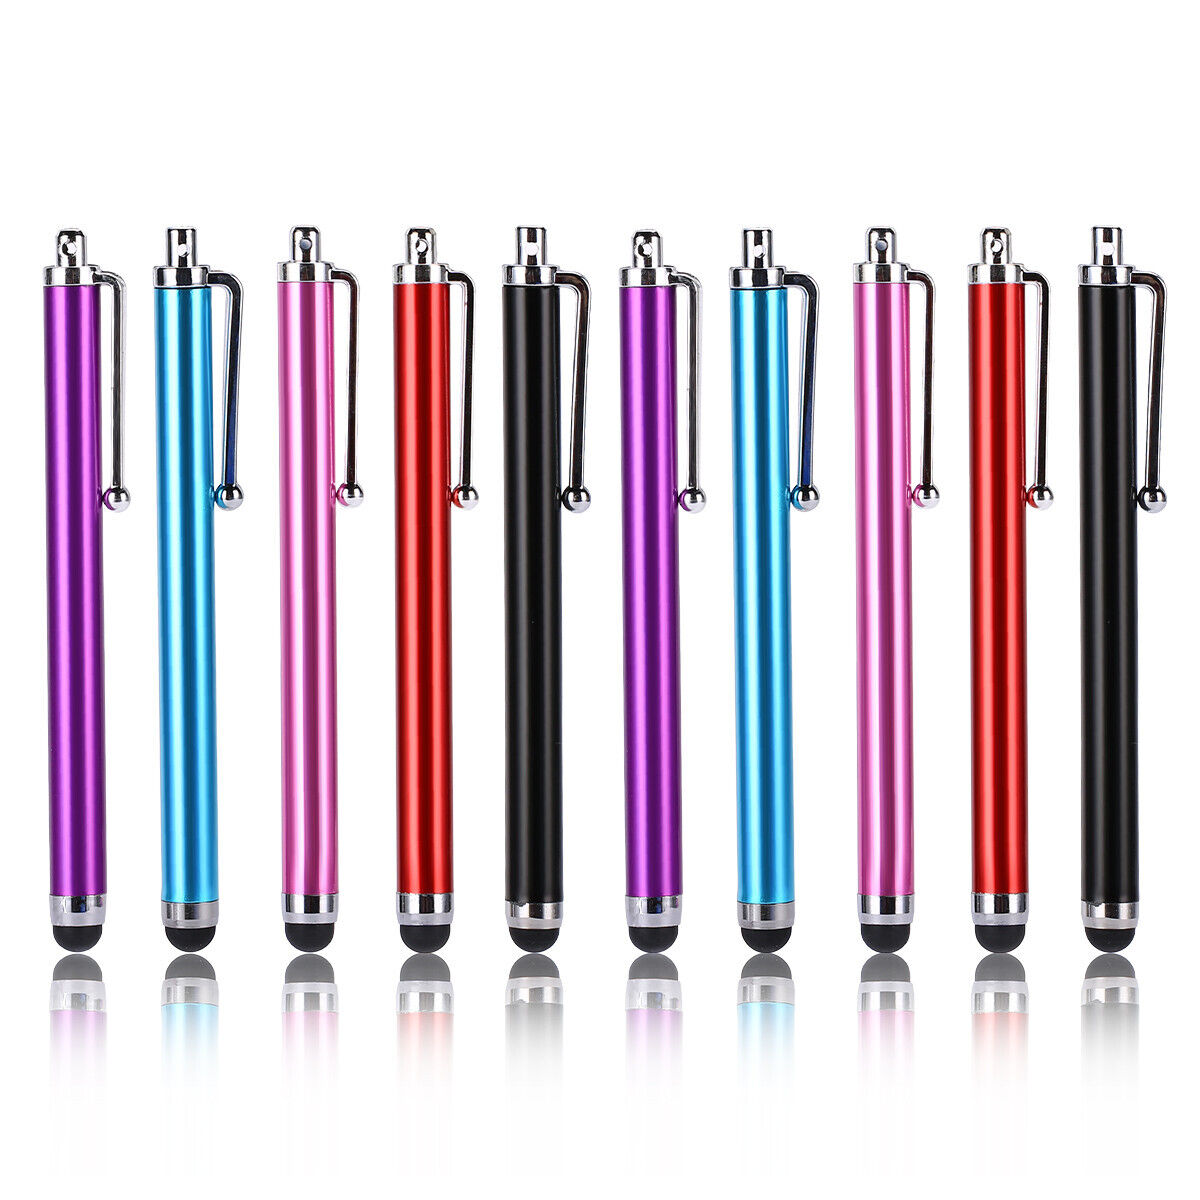 10 Capacitive Touch Screen Stylus Pen Universal For iPhone iPad Samsung Tablet Ombar Universal Touch Screen Stylus/Pen